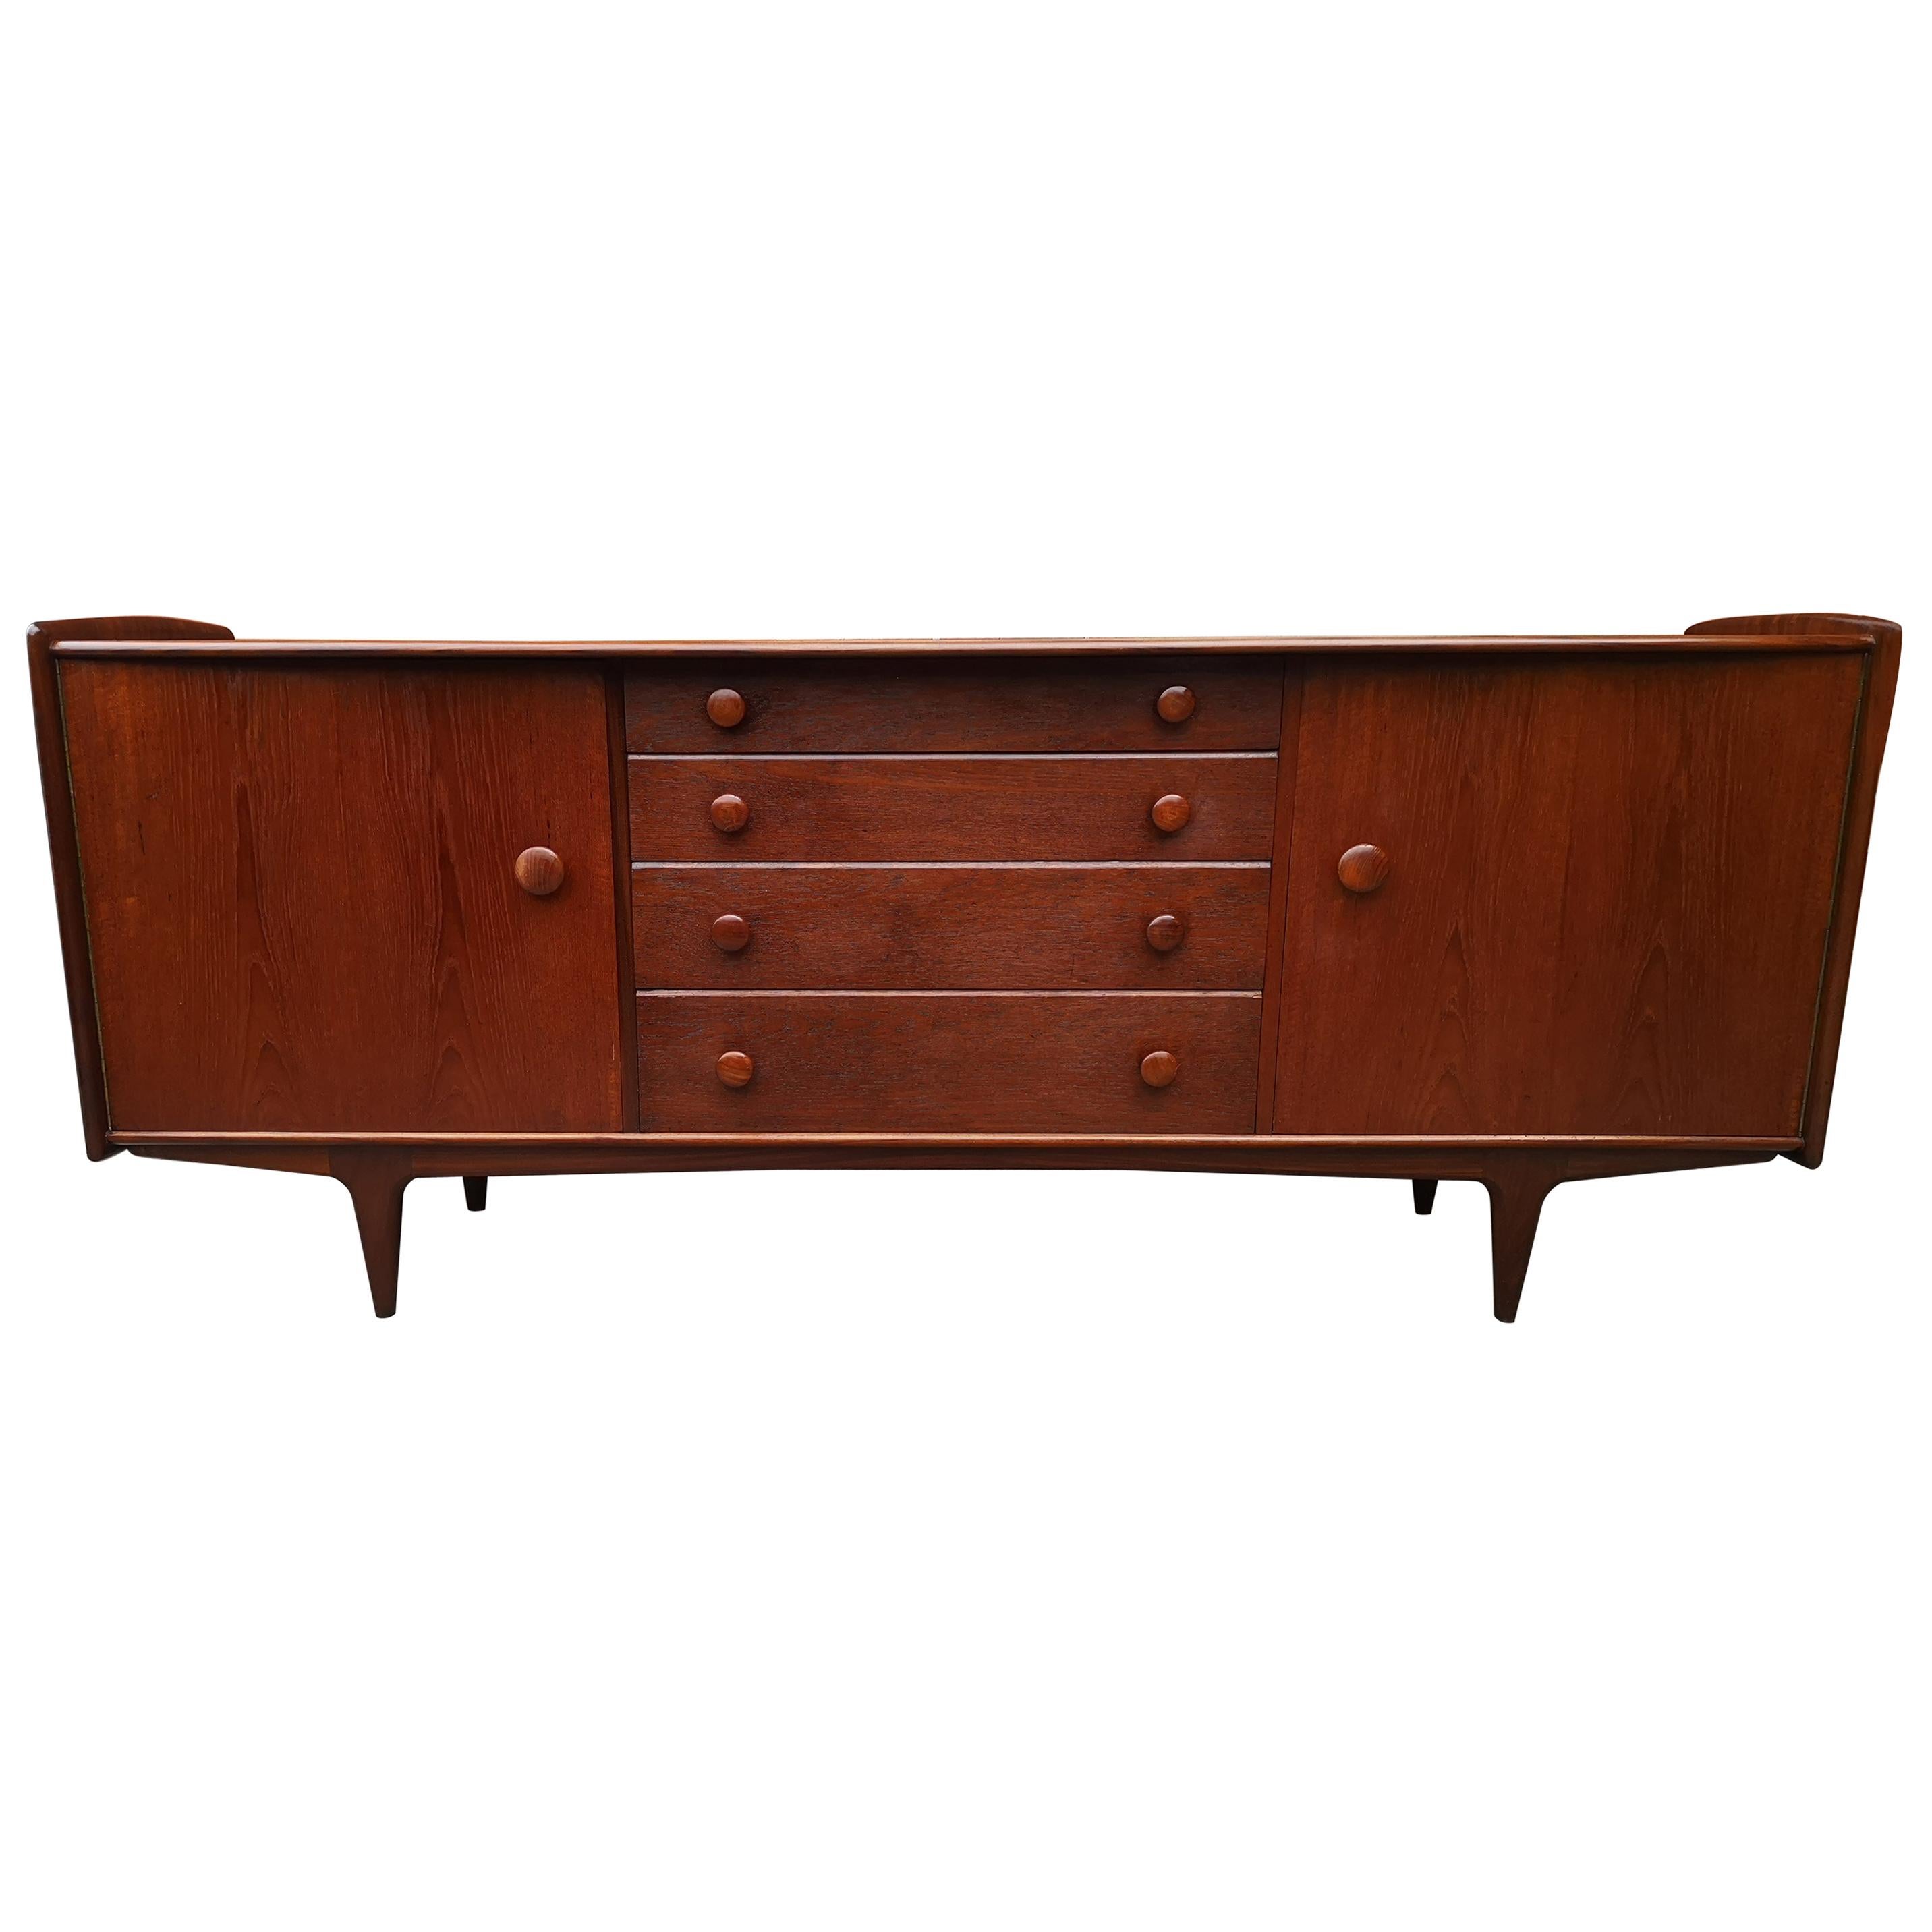 Midcentury Solid Teak and Afromosia Sideboard by John Herbert for A Younger Ltd For Sale